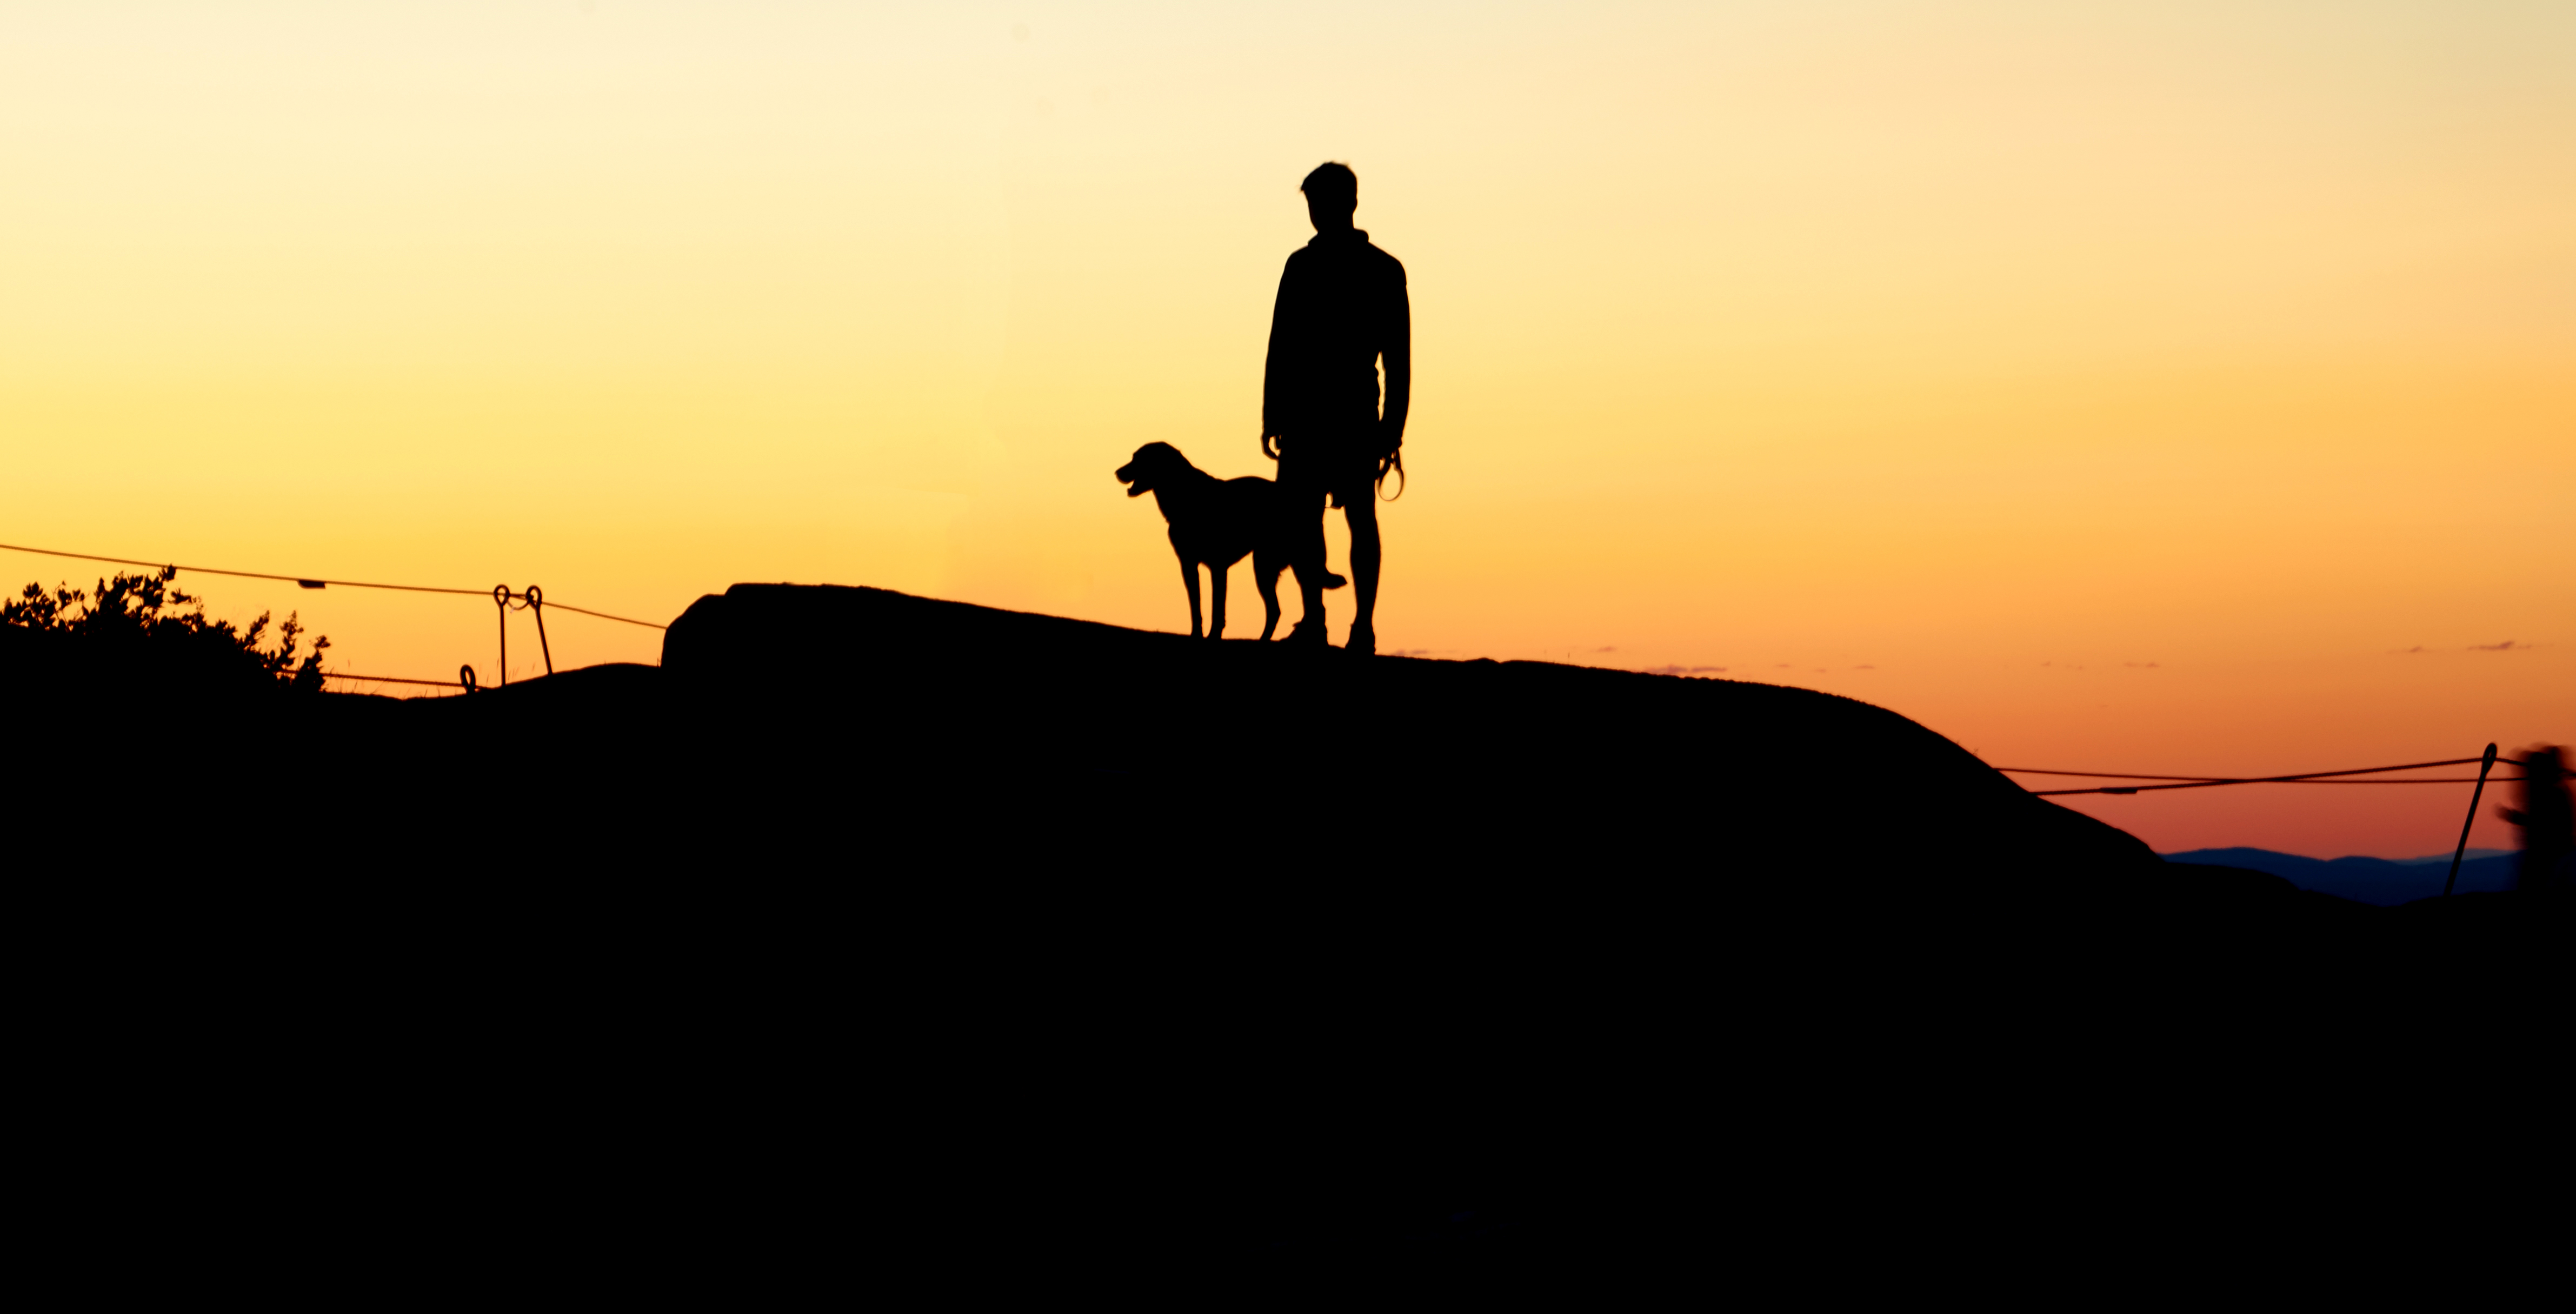 HD desktop wallpaper: Sunset, Dog, Human, Person, Hill, Dark, Silhouettes  download free picture #106829